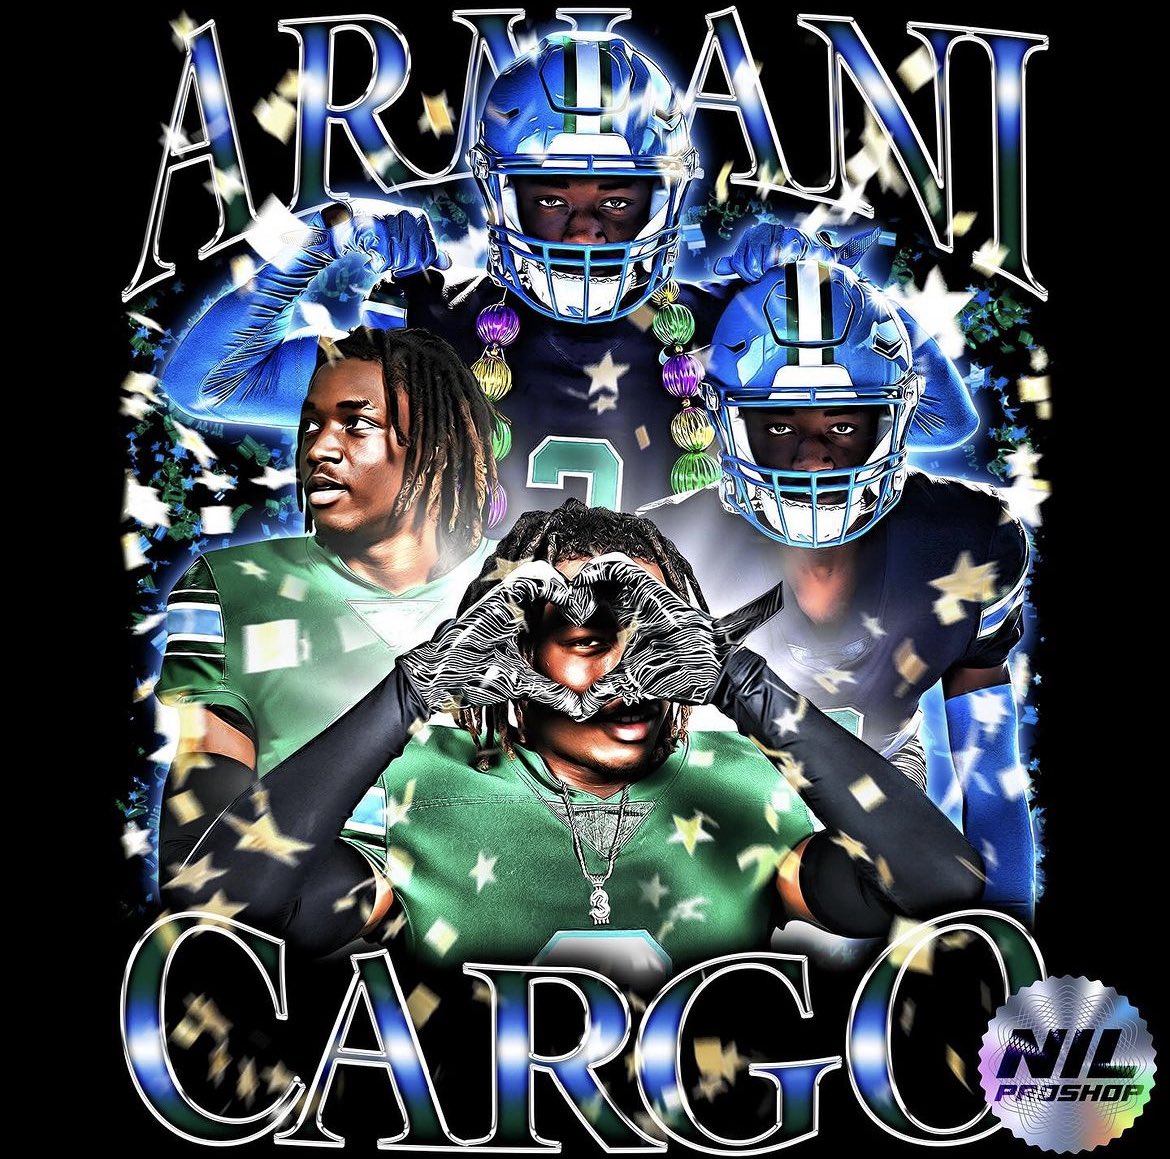 #NewWave Armani Cargo (@ArmaniCargo) Position: CB Class: FR Height: 5’11” Weight: 175 Hometown: Marrero, LA HS: John Ehret HS Recruiting: -3⭐️88/100 -#18 player in LA -Offers from Texas Tech, Memphis, Marshall and more -100m(10.45) and 200m(20.89) Track State champion in ‘23